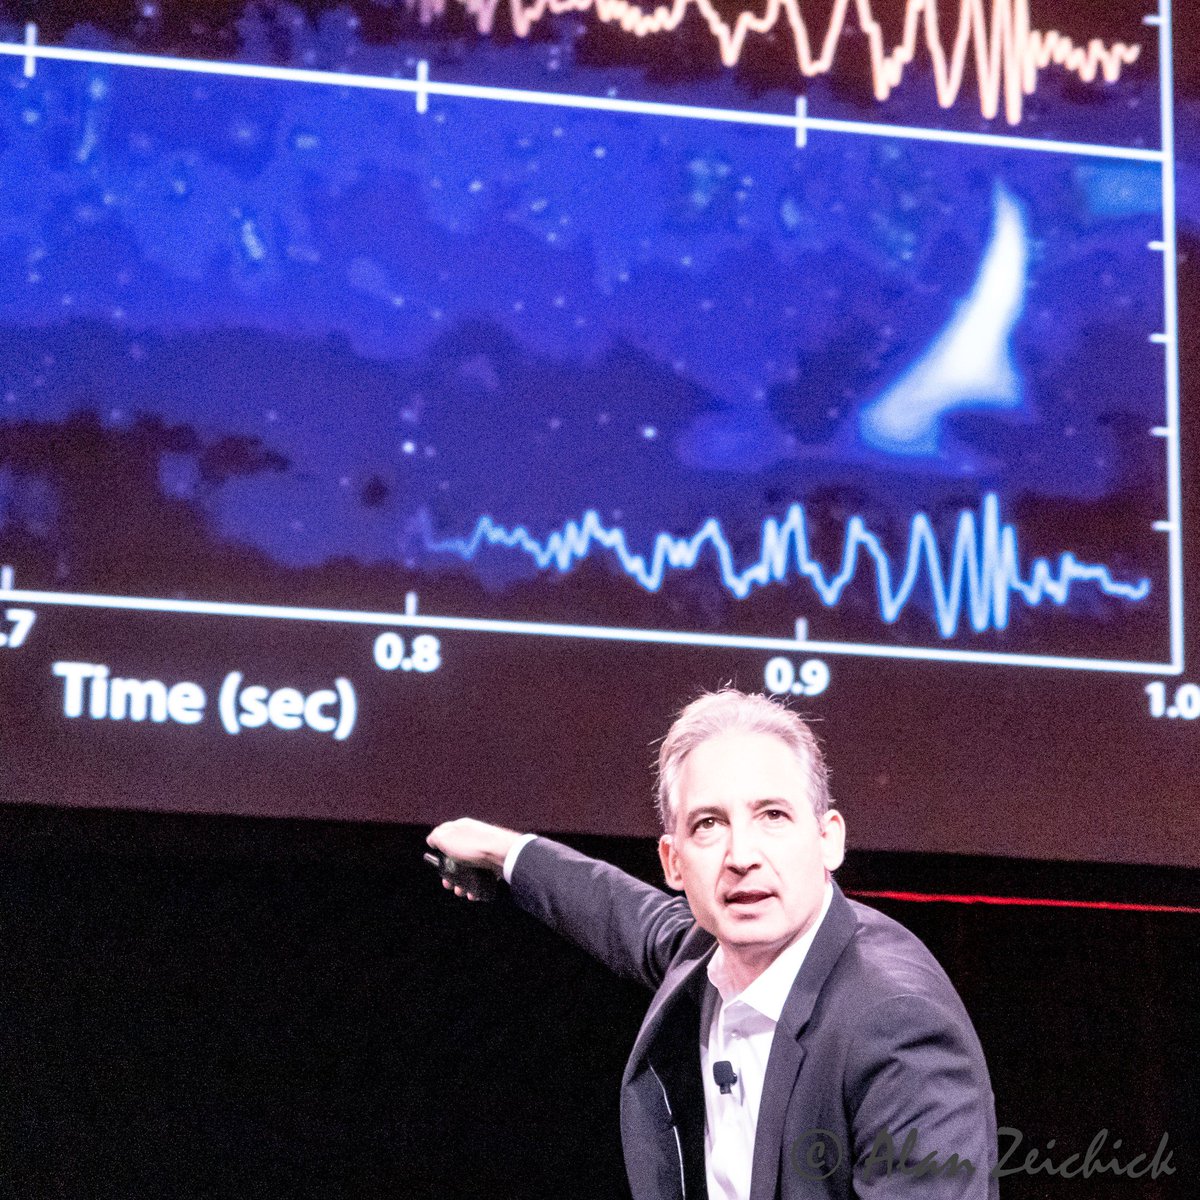 A highlight of #oow18: @bgreene's civilian-friendly overview of the issues regarding information loss in #blackholes, and how #quantumentanglement relates to #Hawkingradiation.